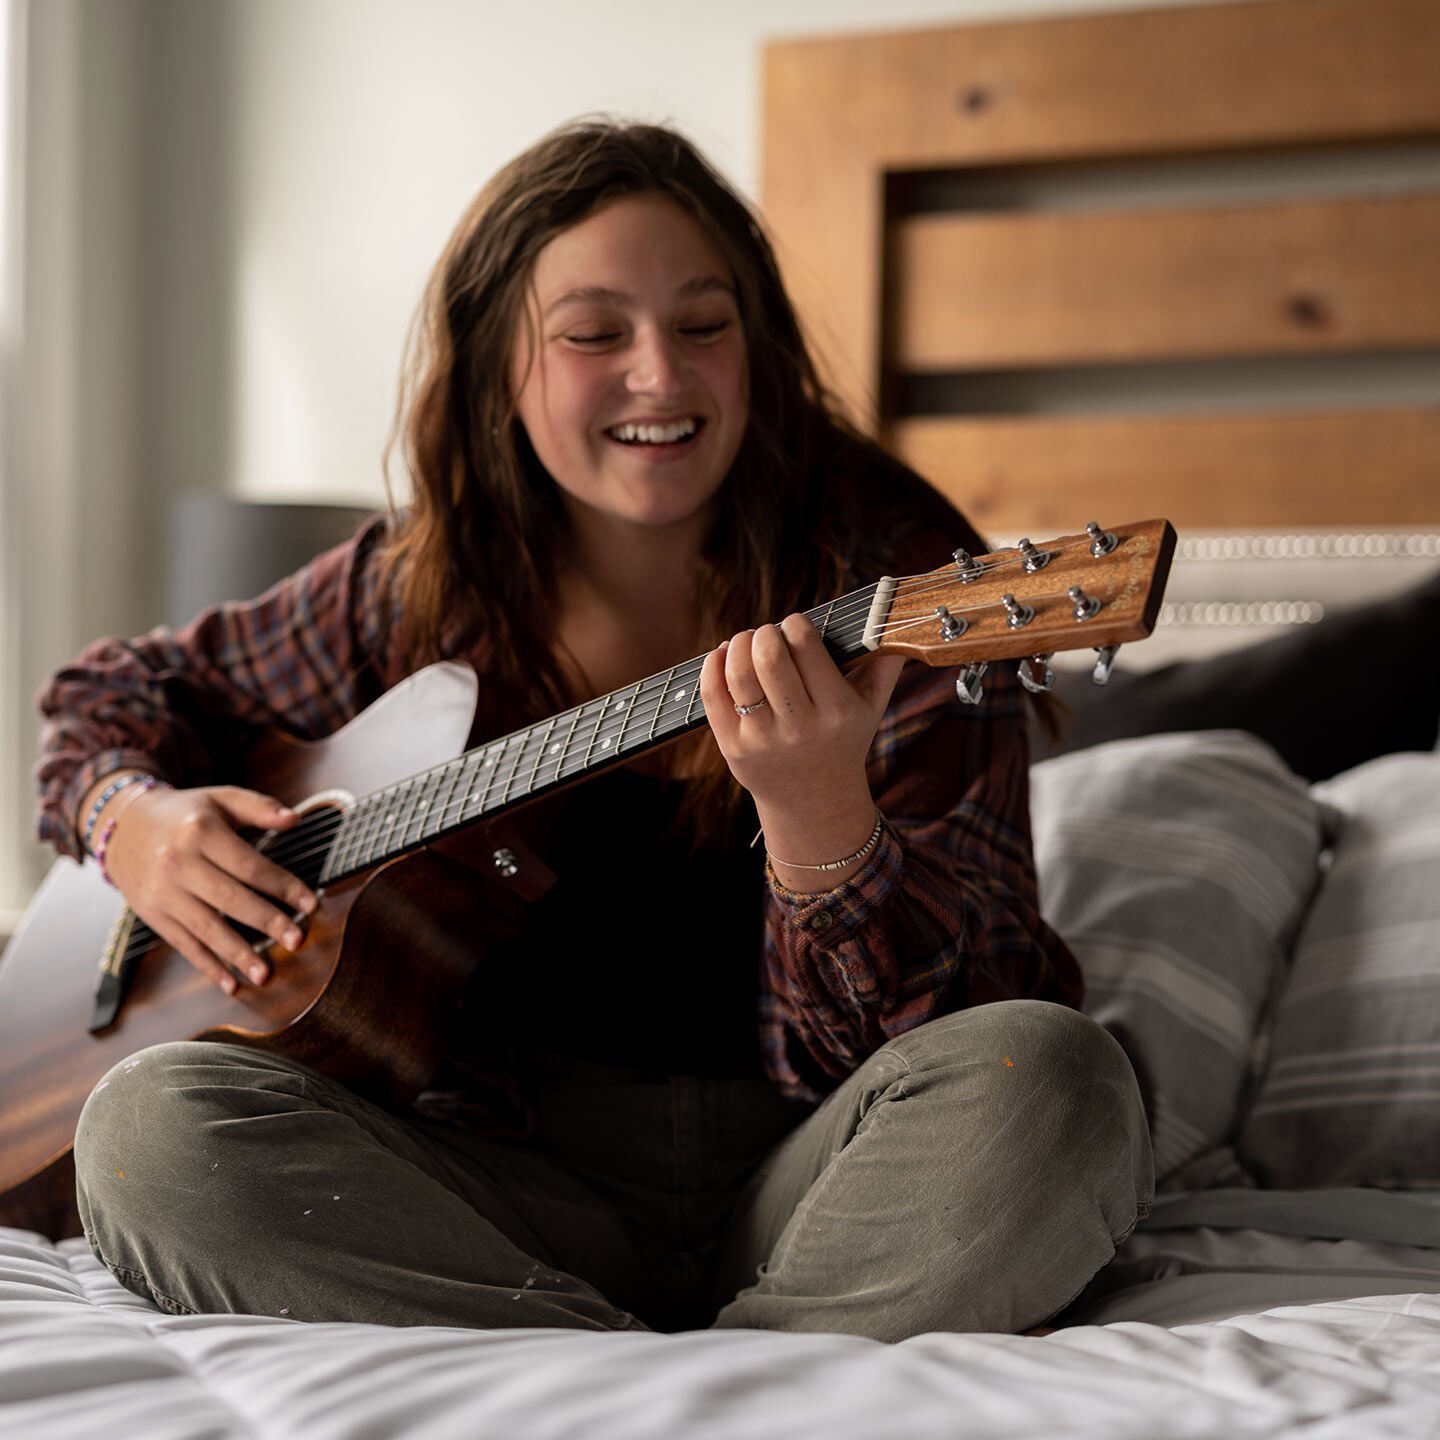 Woman playing guitar on bed